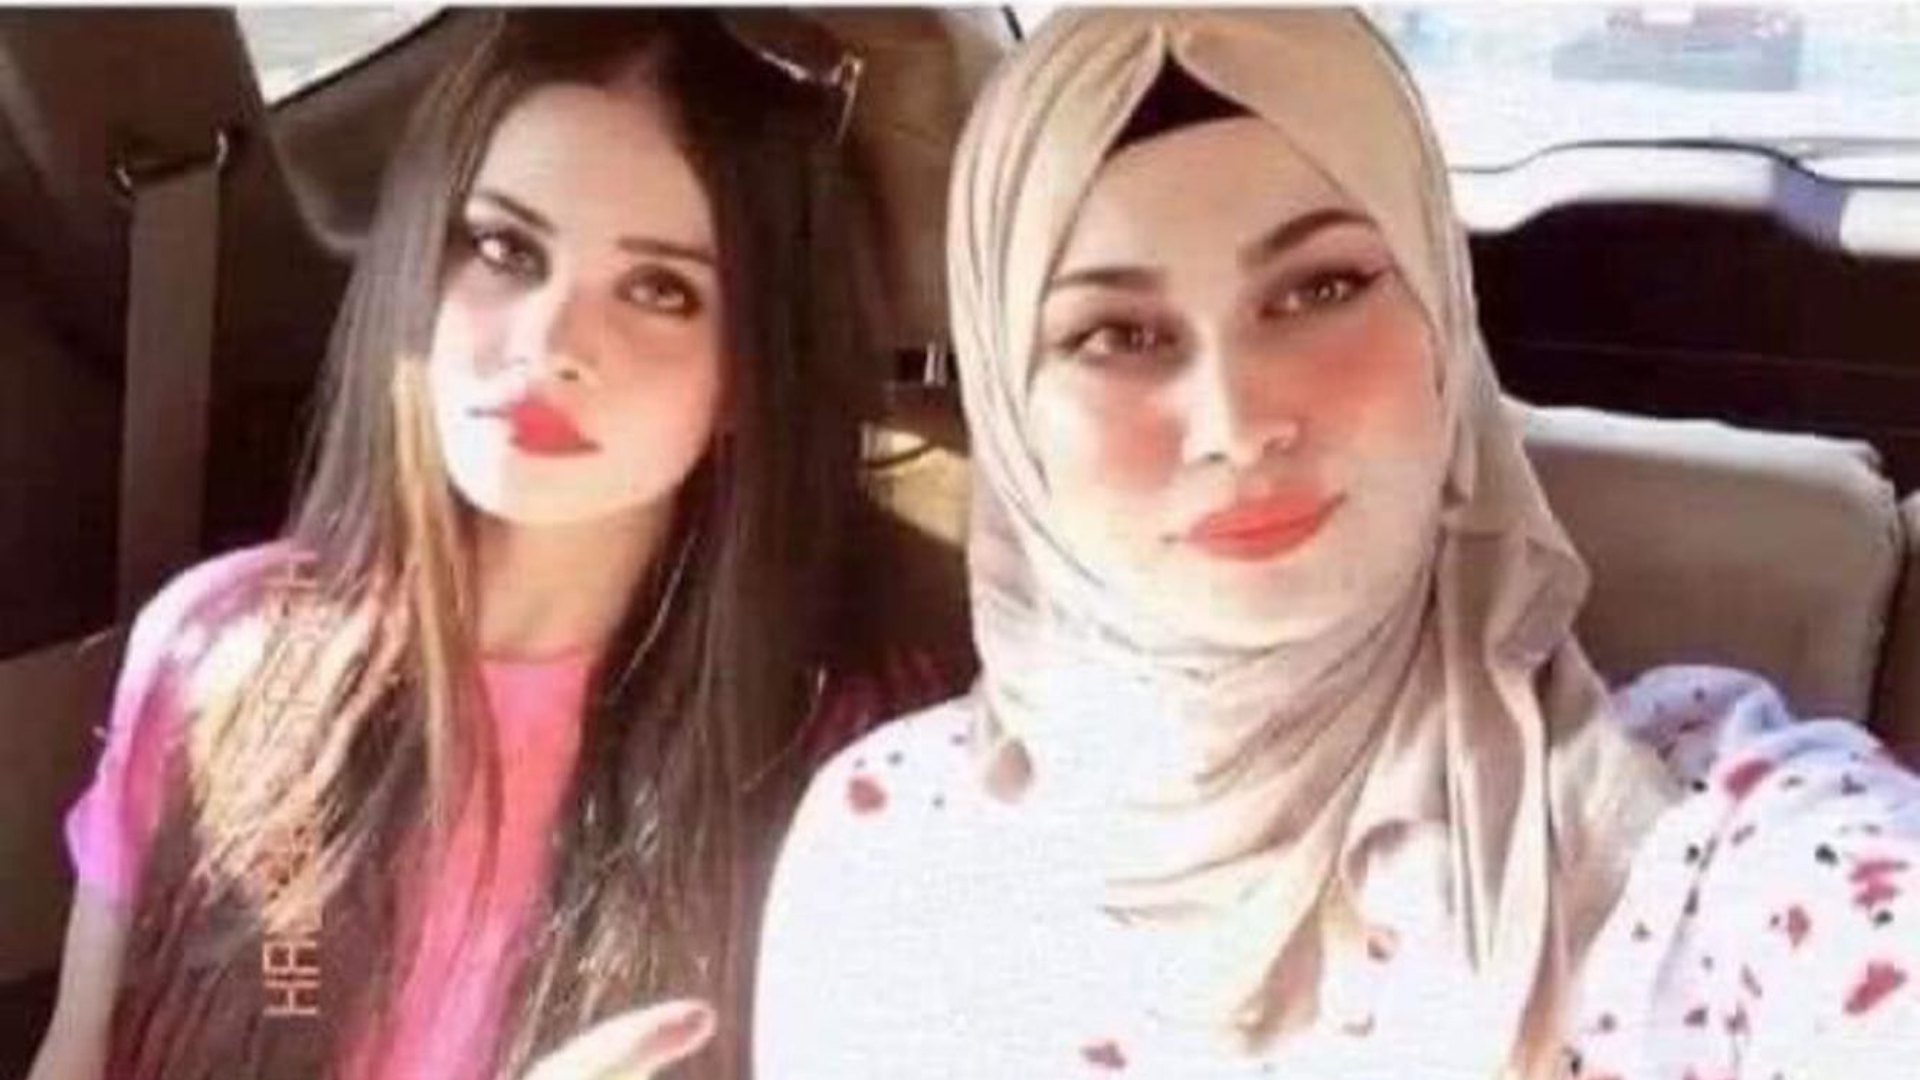 Killing of Iraqi sisters by drunken brother sparks outrage pic